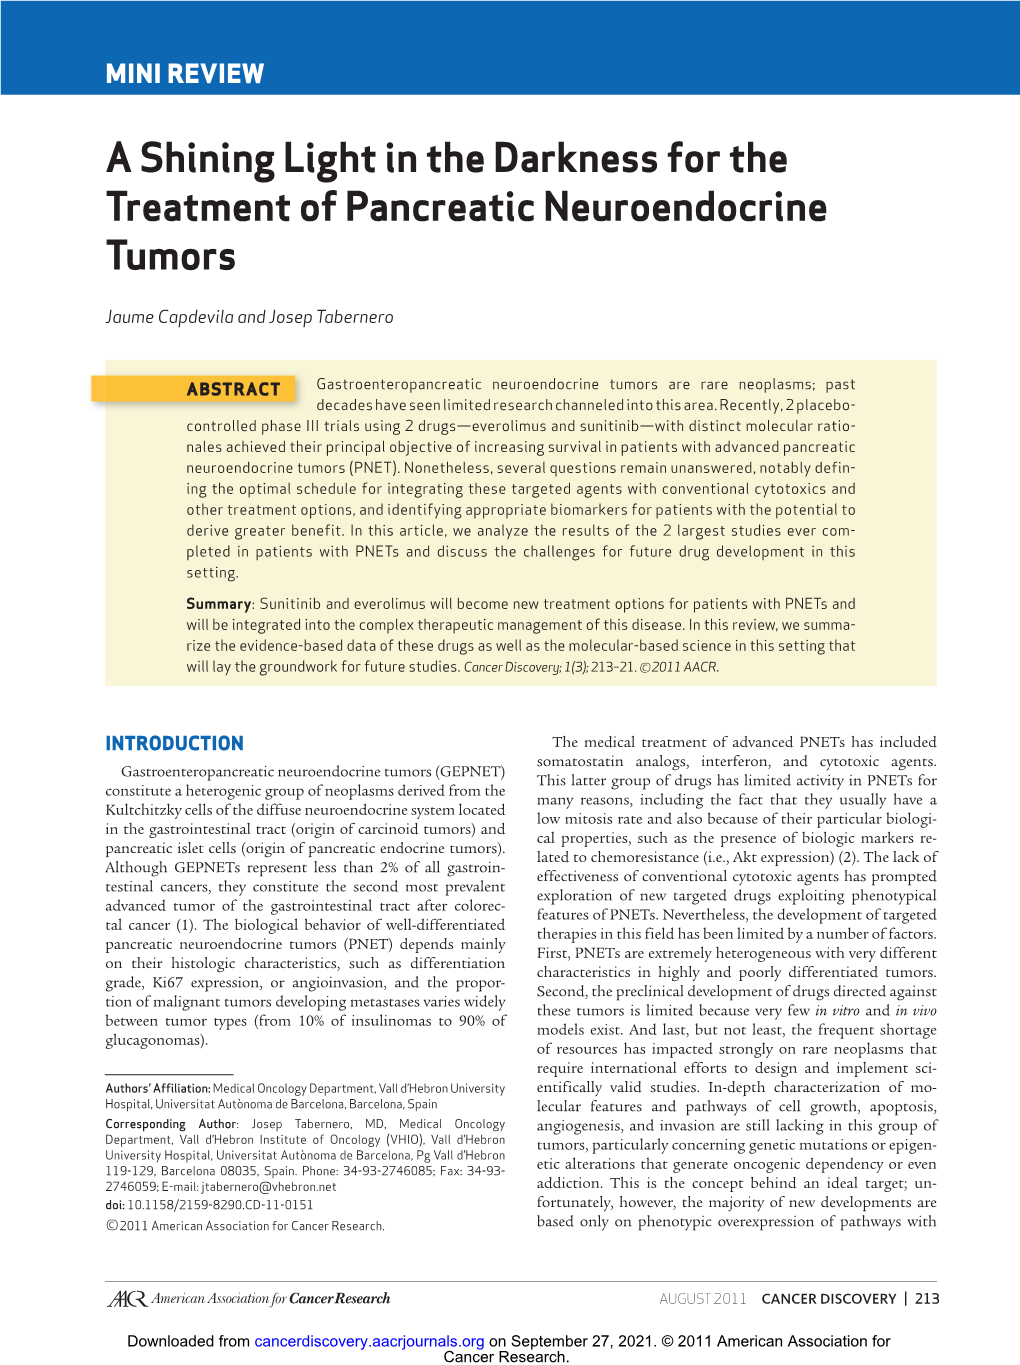 A Shining Light in the Darkness for the Treatment of Pancreatic Neuroendocrine Tumors